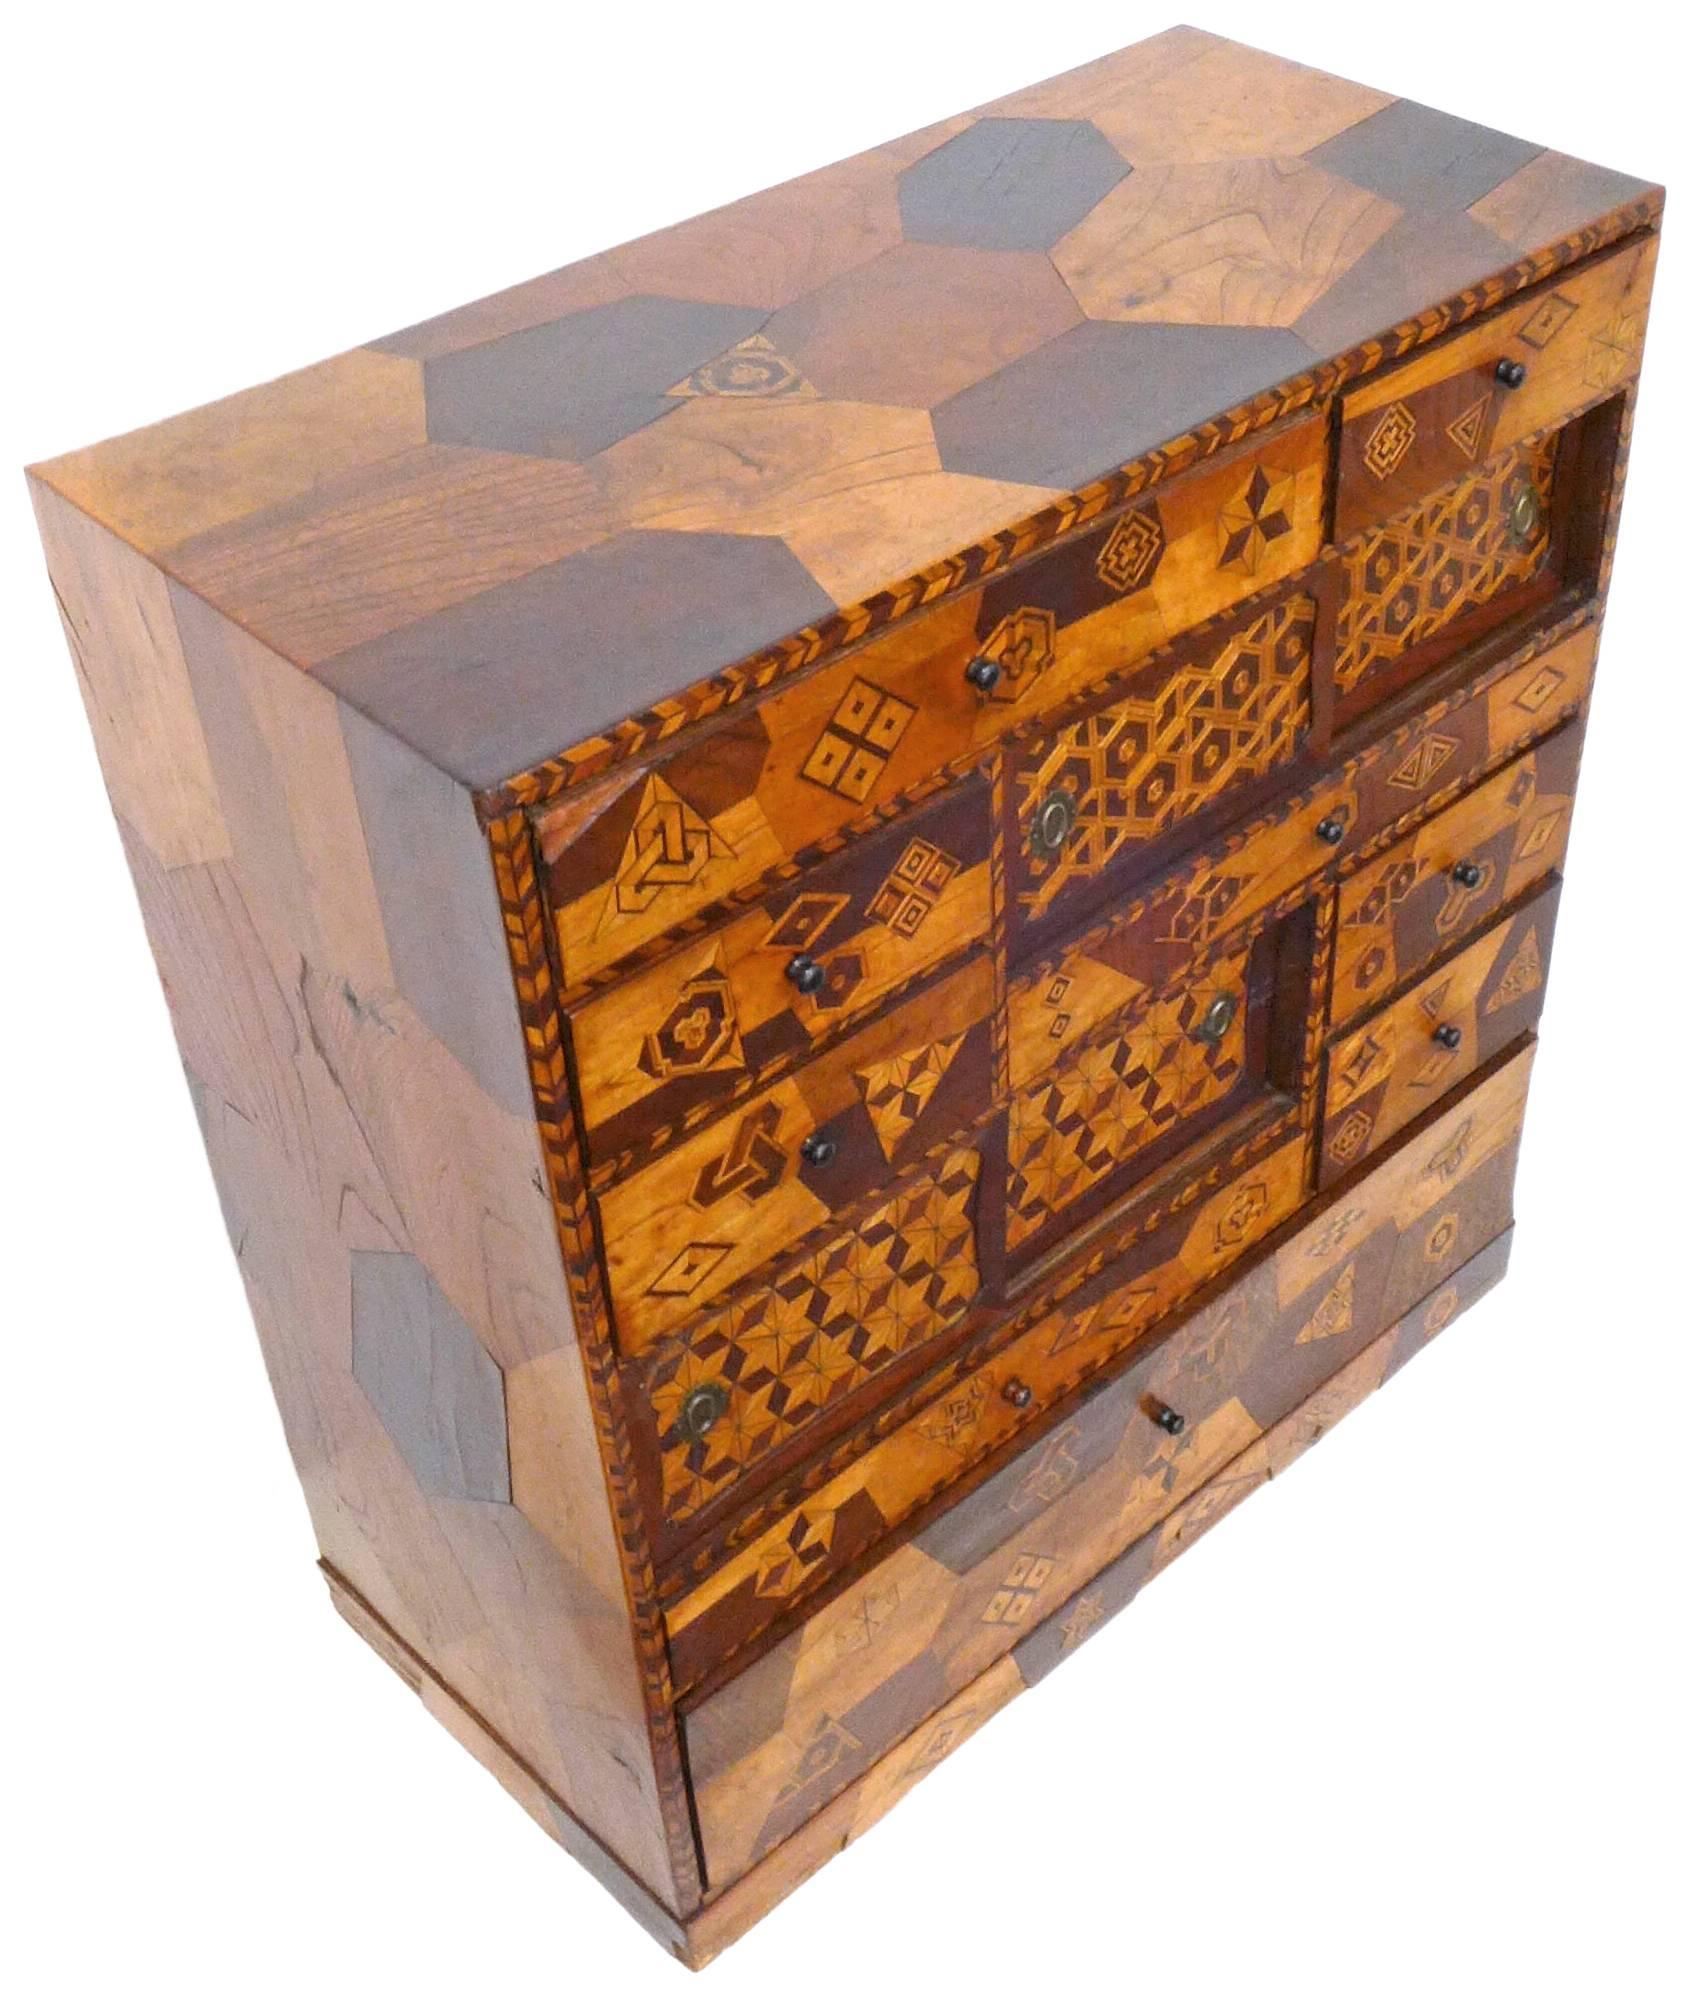 A wonderful and unusual handcrafted, Japanese marquetry cabinet. A fantastic, compact piece, thoroughly covered in a playful array of geometric designs; featuring drawers of various sizes as well as sliding-door compartments. Incredible execution